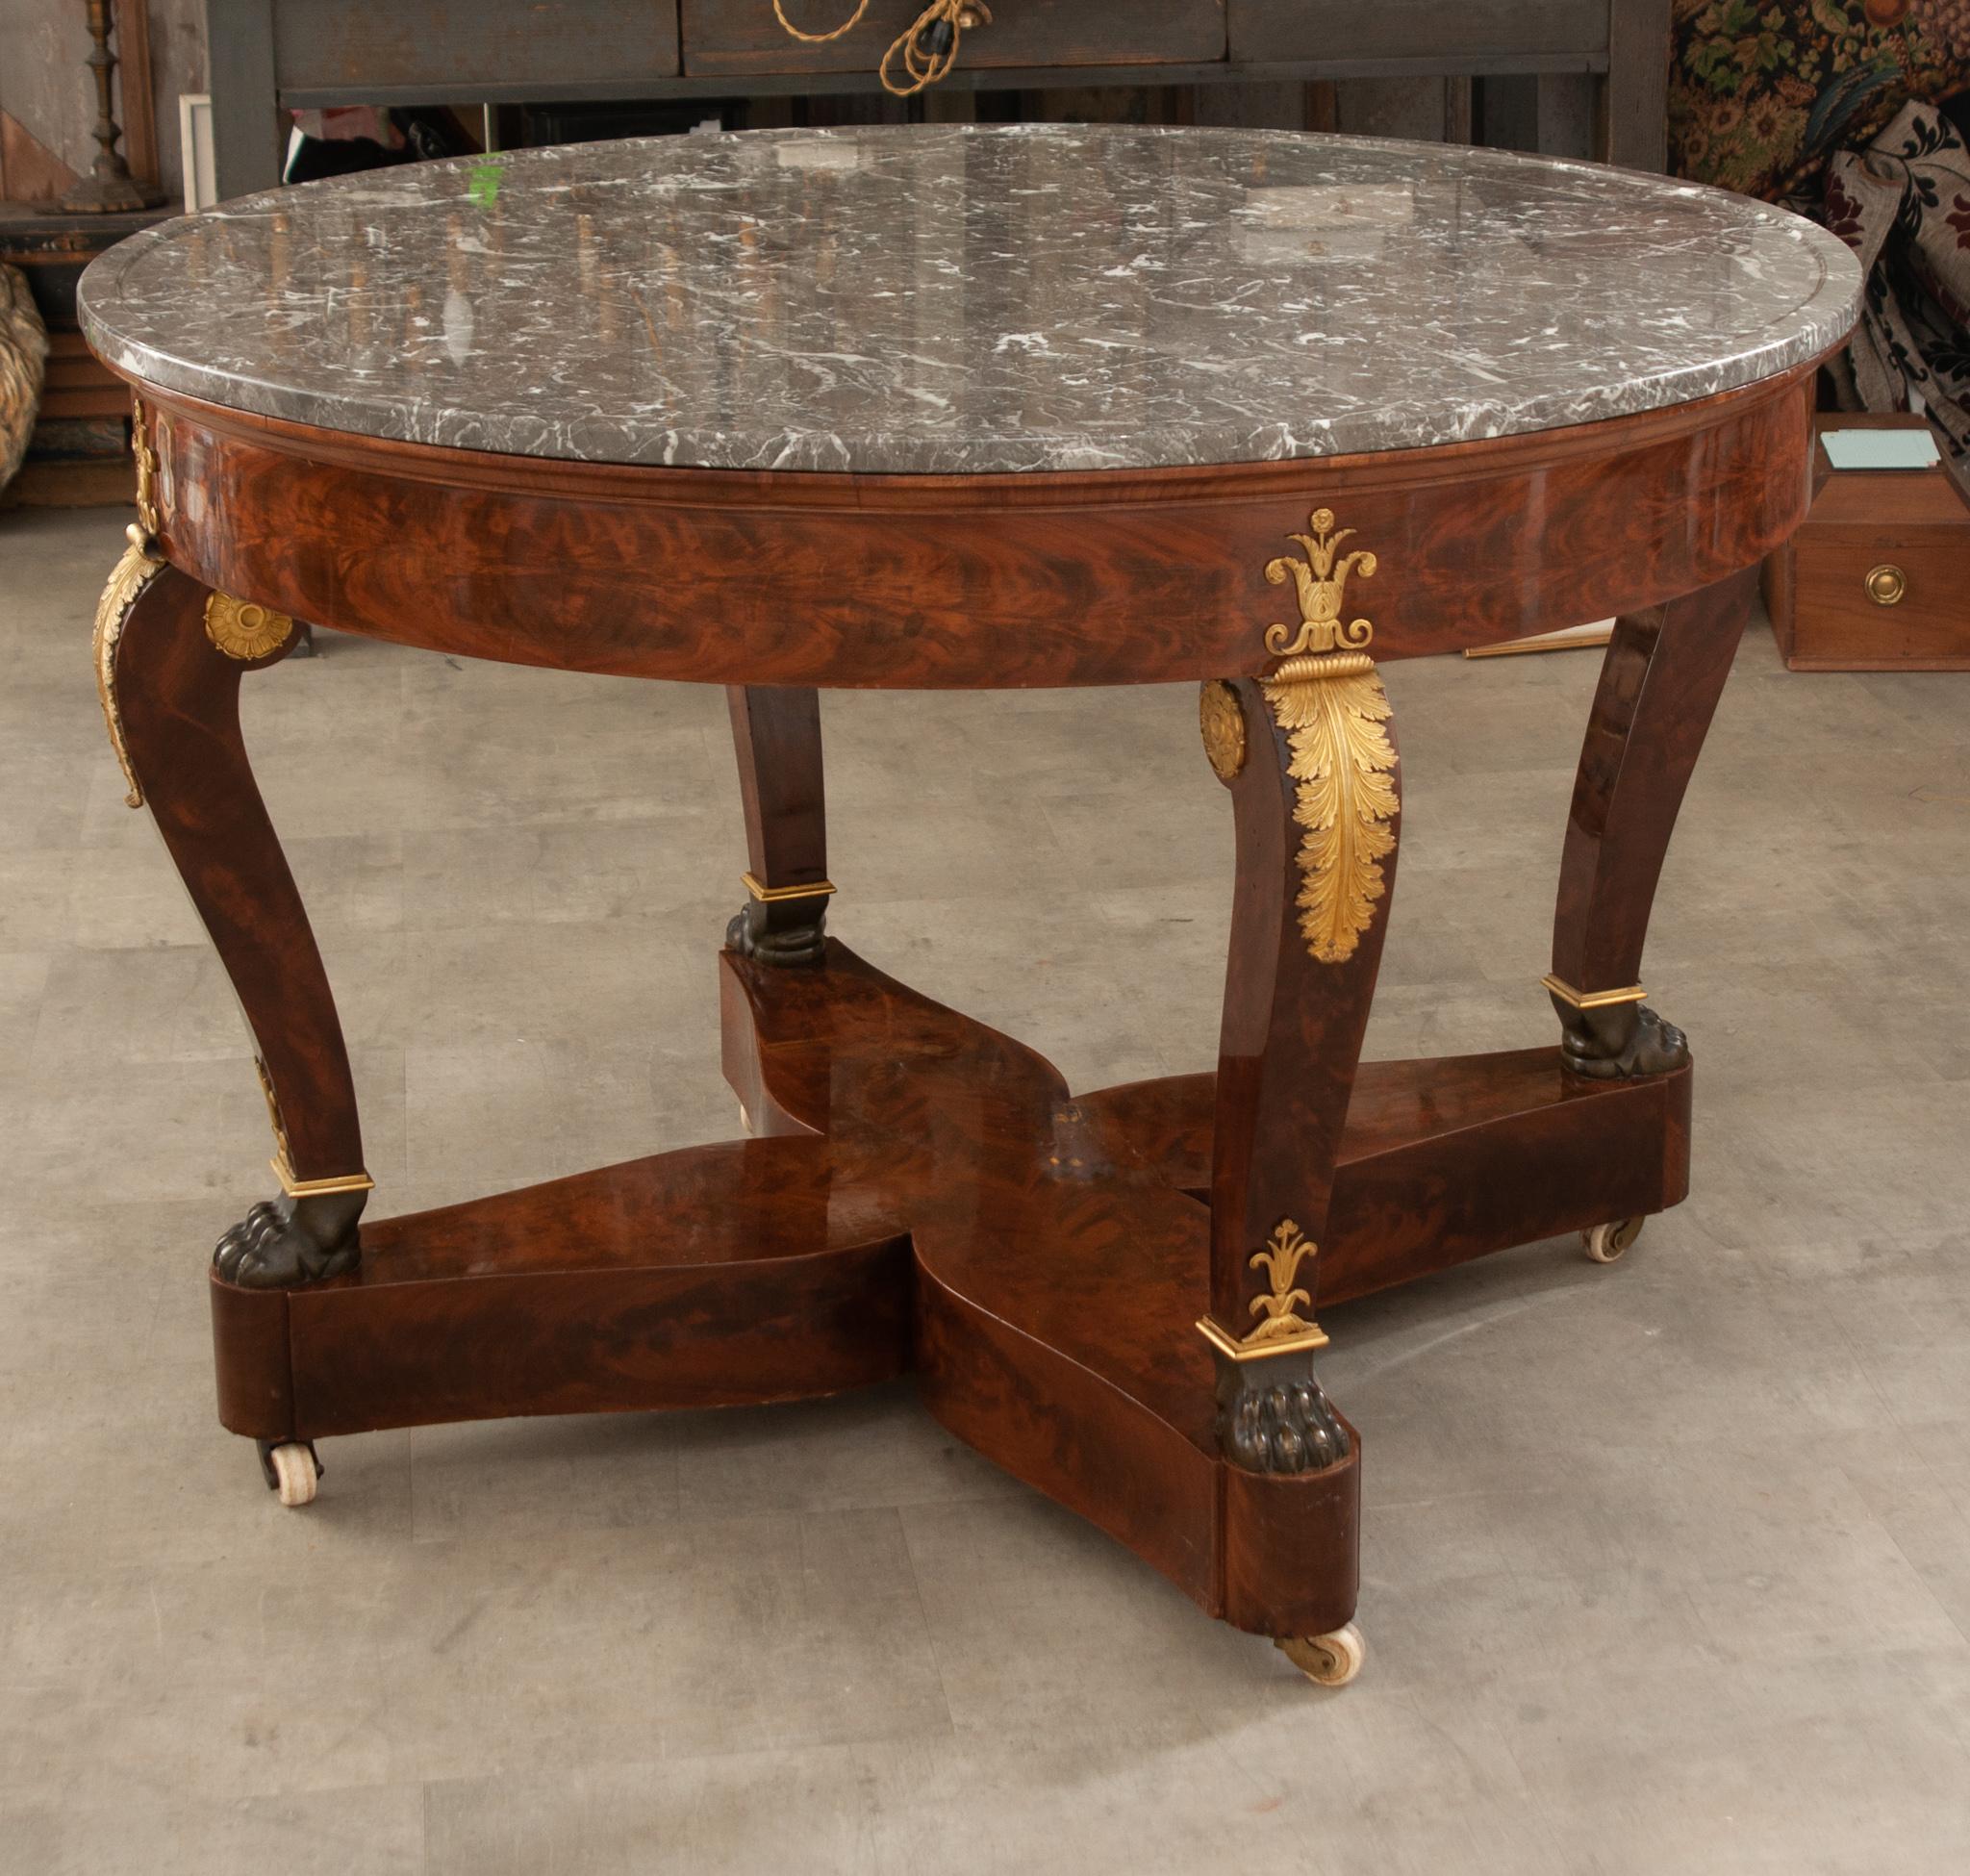 An impressive 19th Century Empire center table made in France. The gray-white marble top sits perfectly on its table base with an inset beveled marble ring. The table base is wrapped in stunning flame mahogany and is raised by elegant scrolled legs